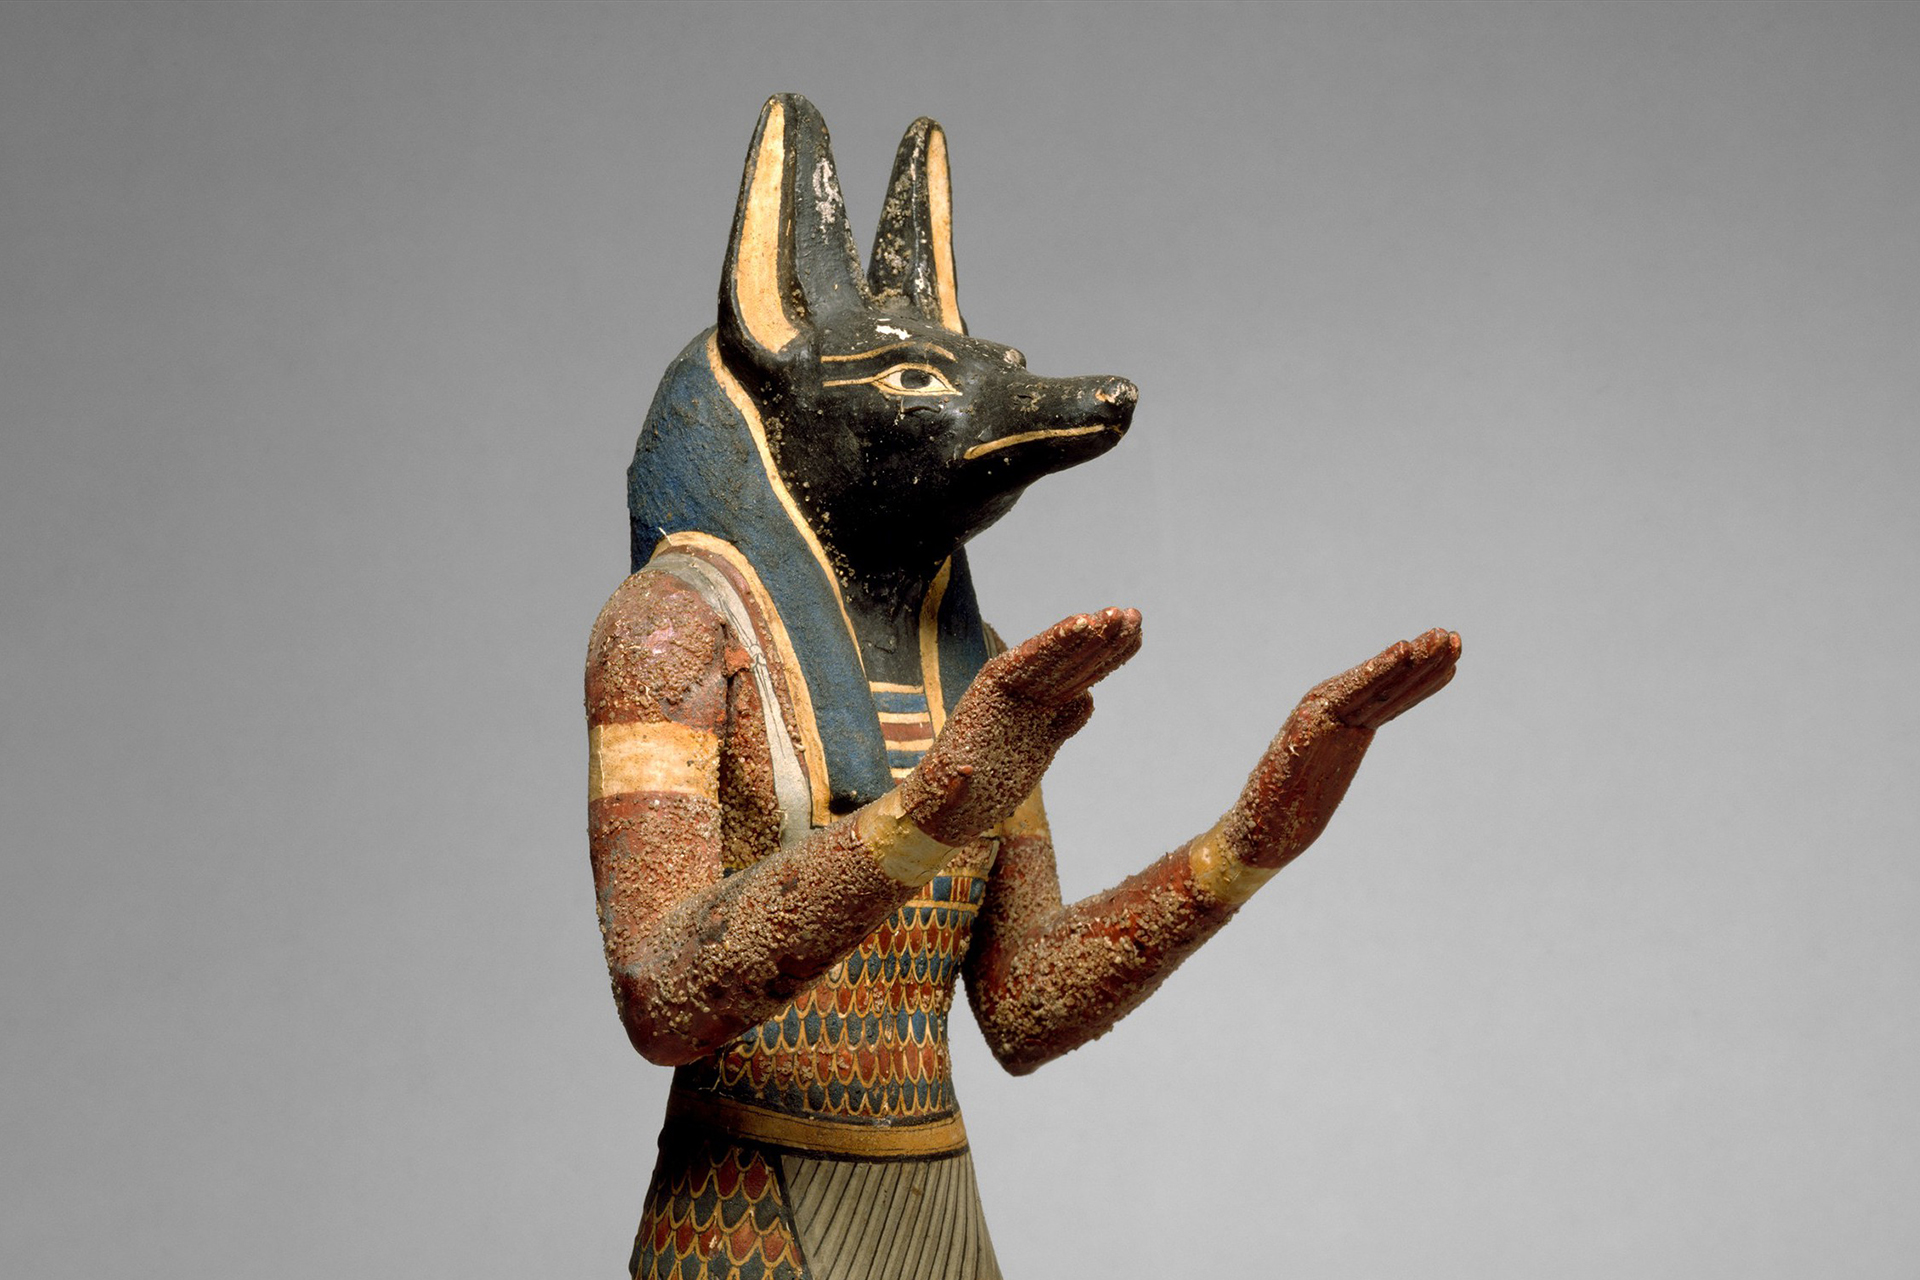 A Unique Ancient Egyptian Statue Of Anubis Jackal God Of Afterlife And Mummification Standing